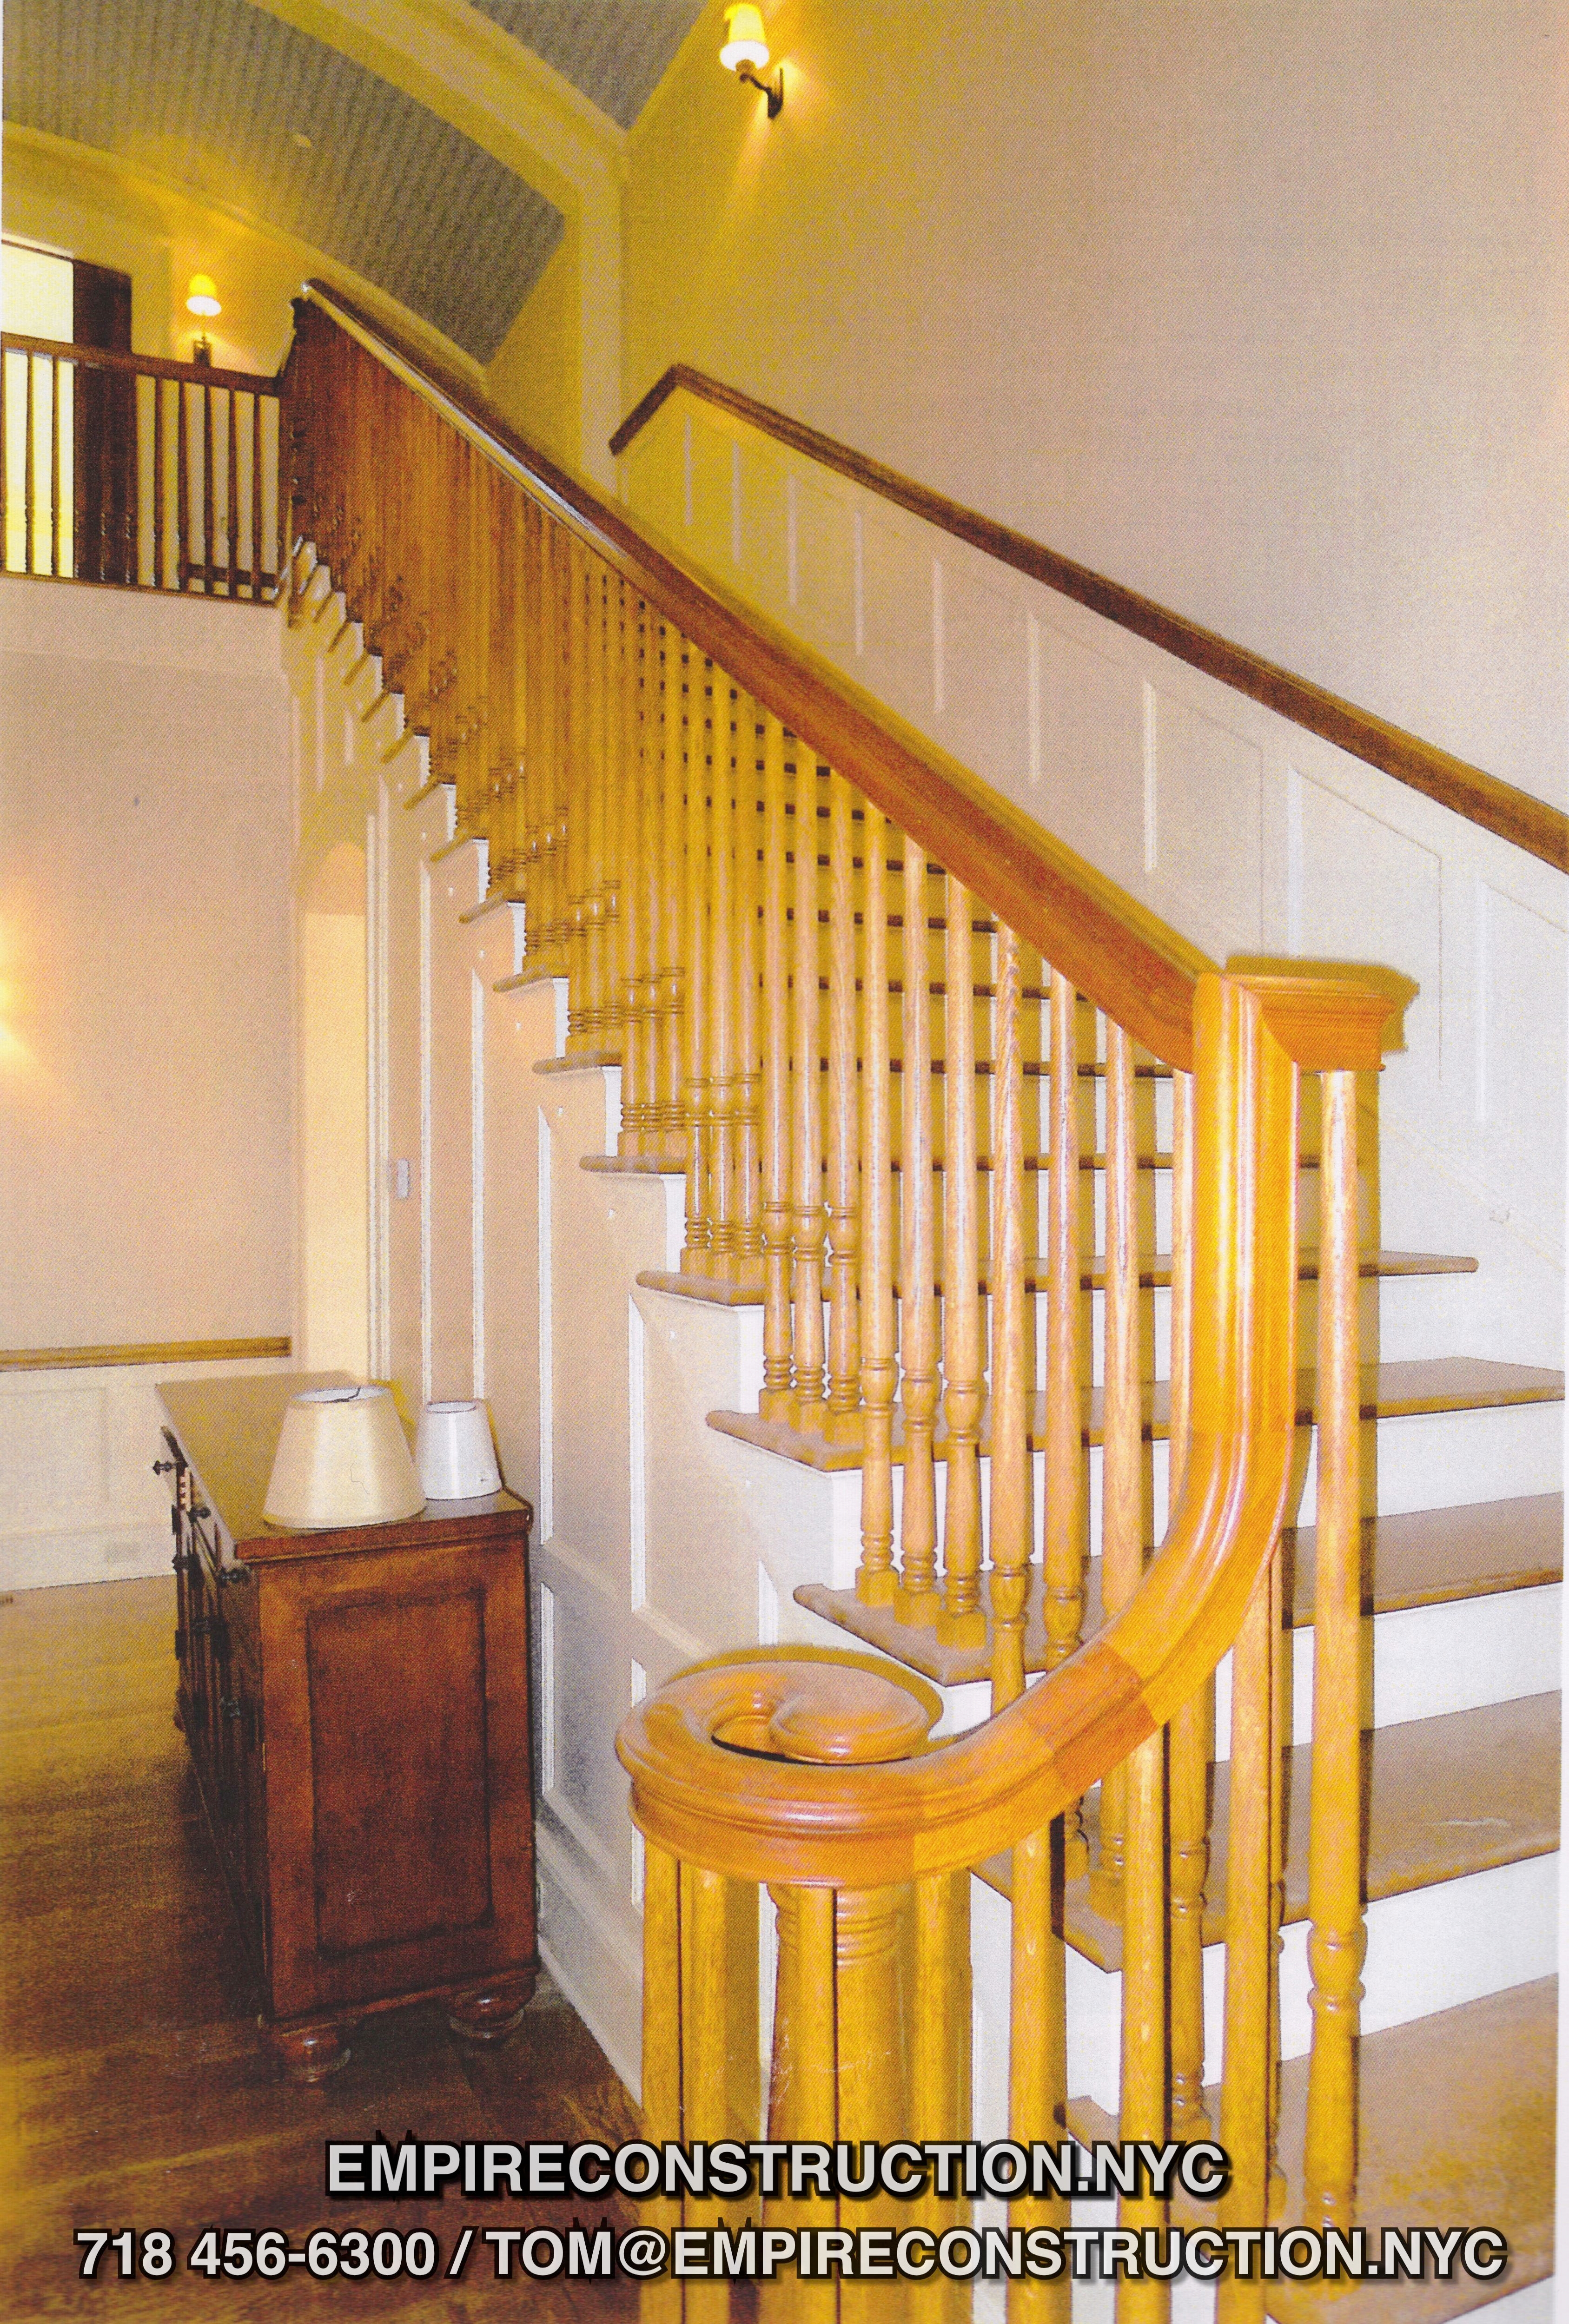 Custom, run-to-profile staircases, railings and stair parts - coordinated, finished and installed in any type of high finish structure. 